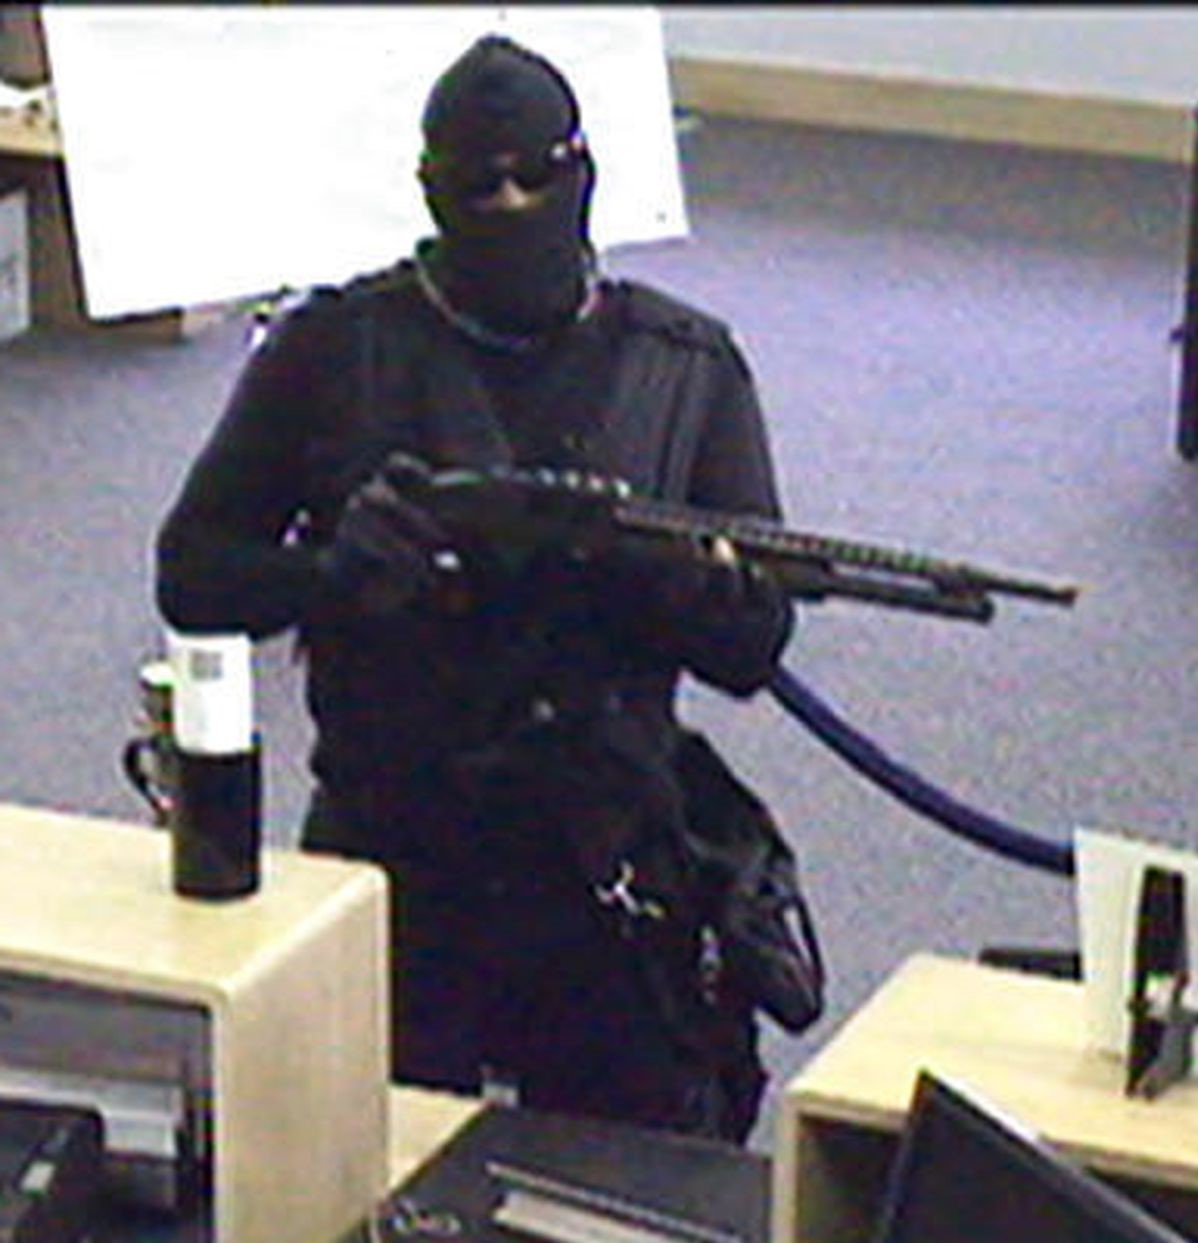 A bank robber.